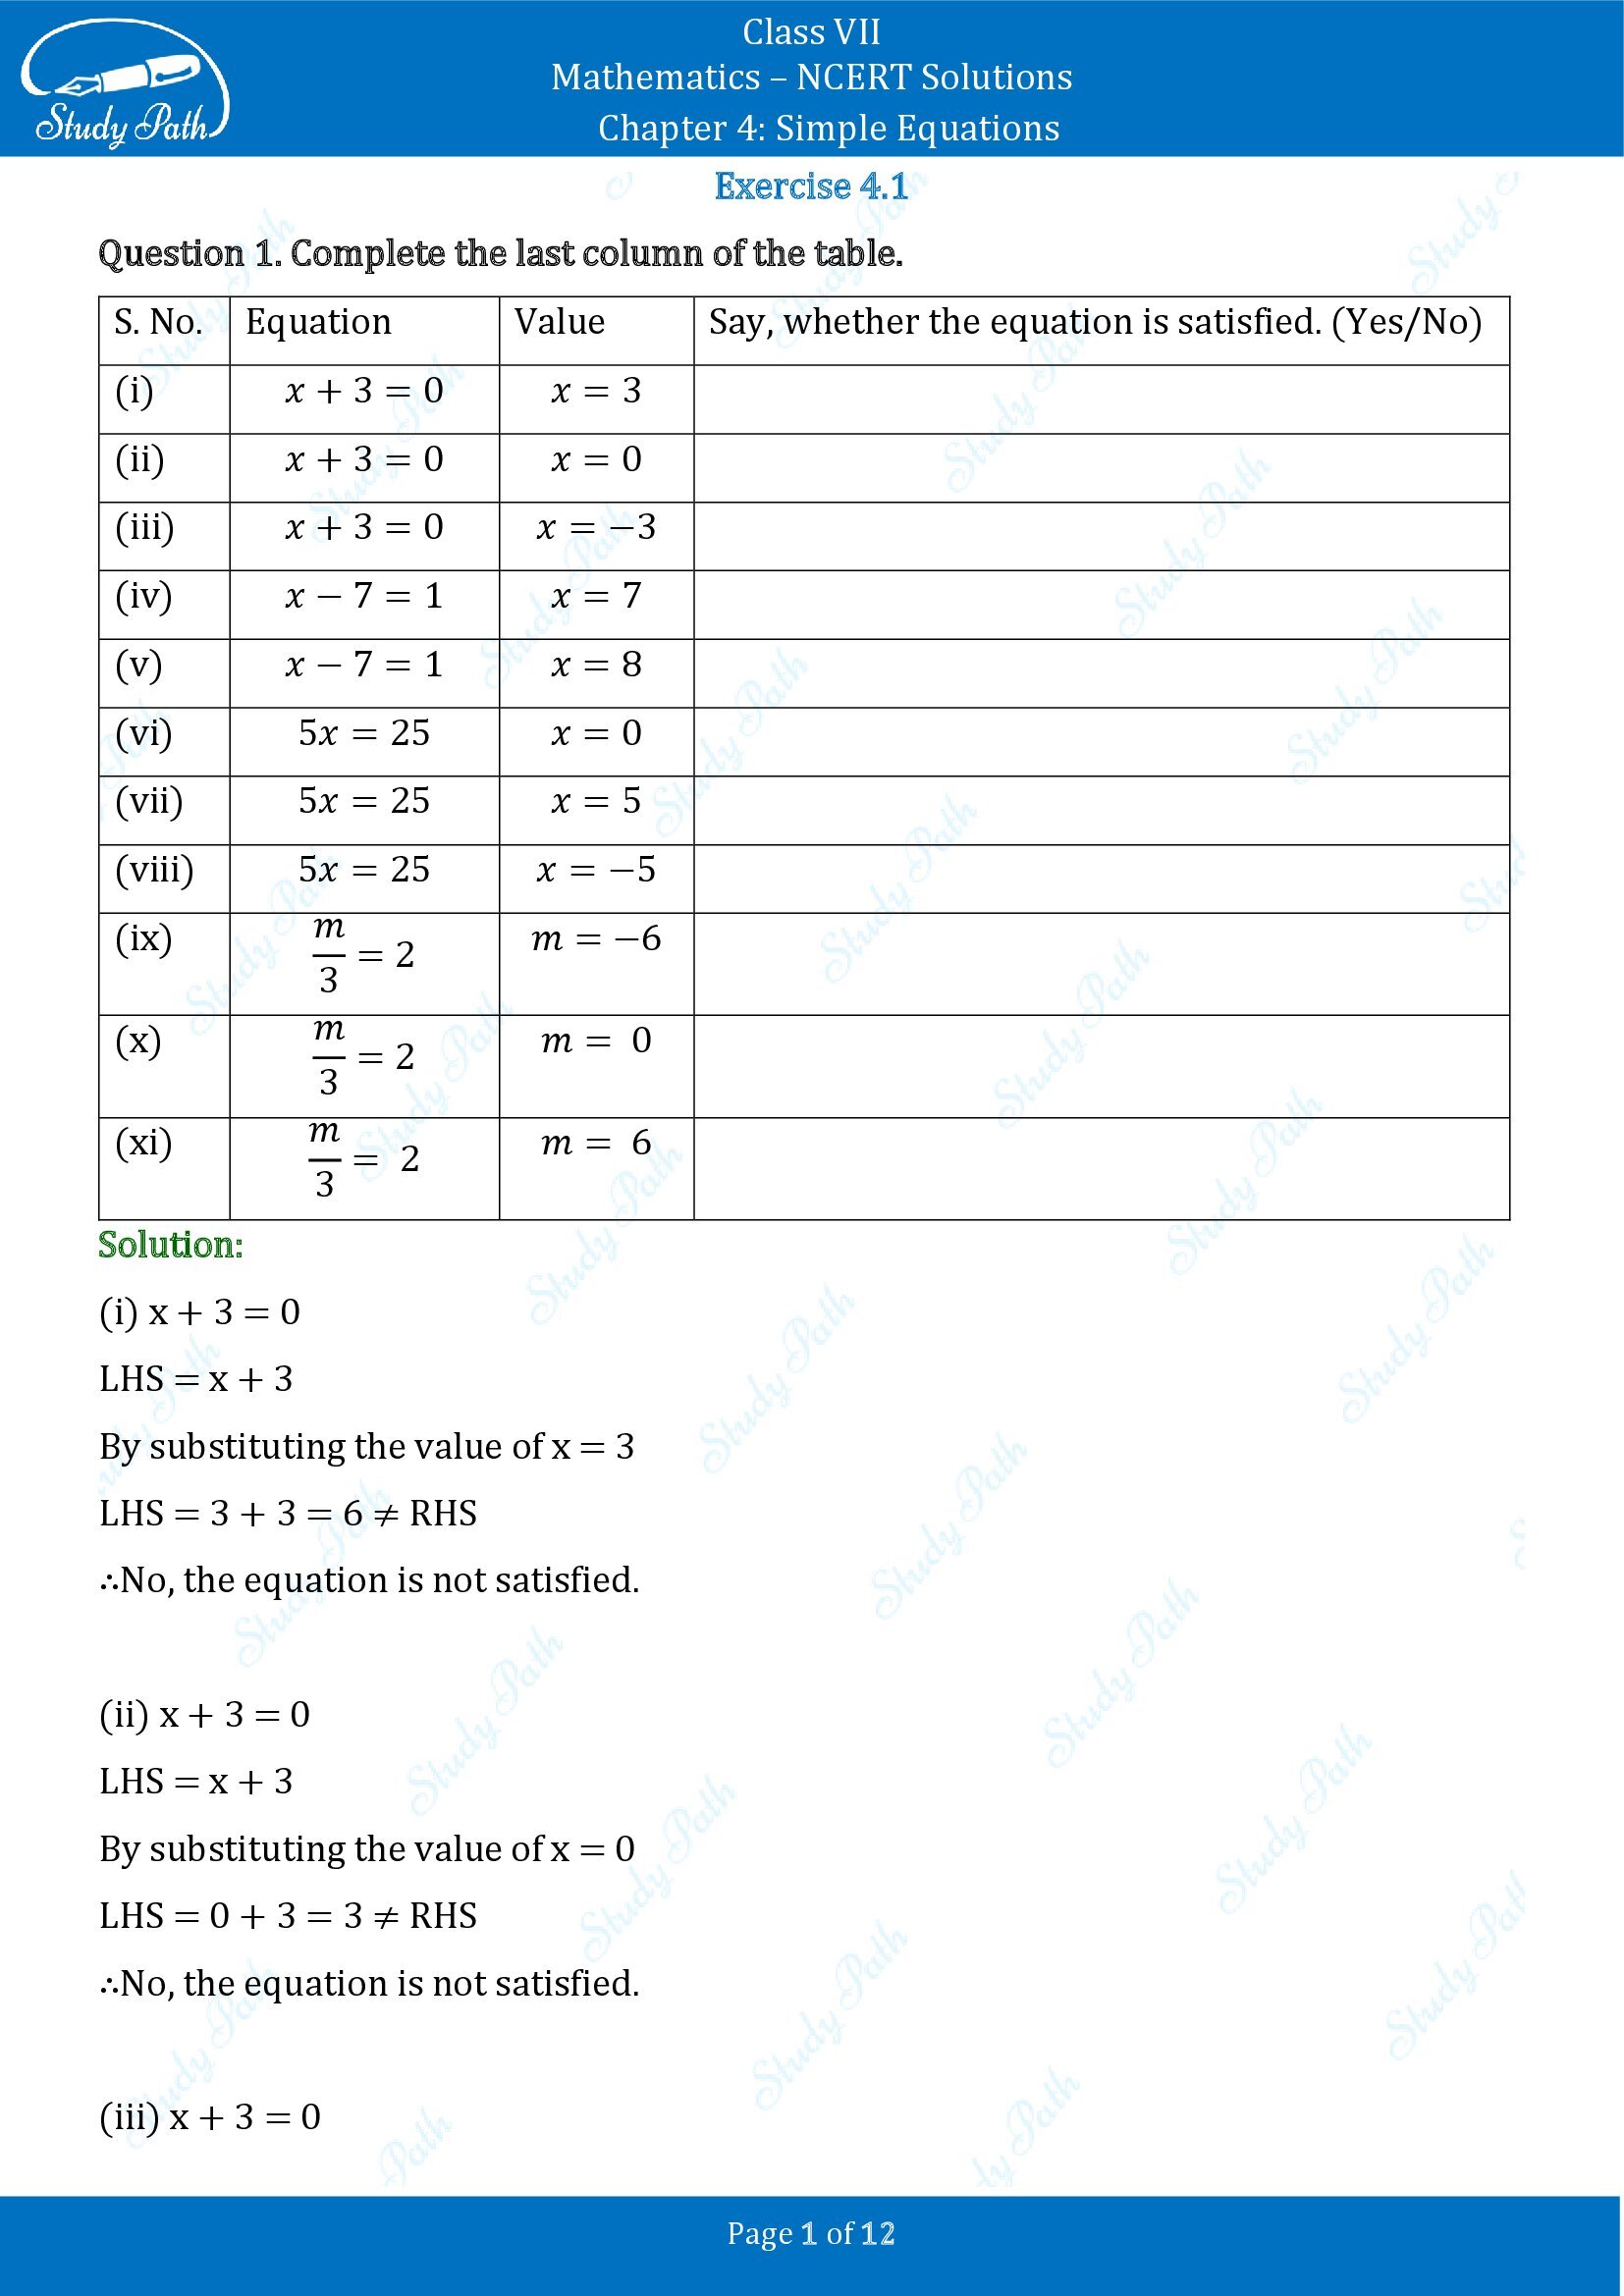 NCERT Solutions for Class 7 Maths Chapter 4 Simple Equations Exercise 4.1 00001